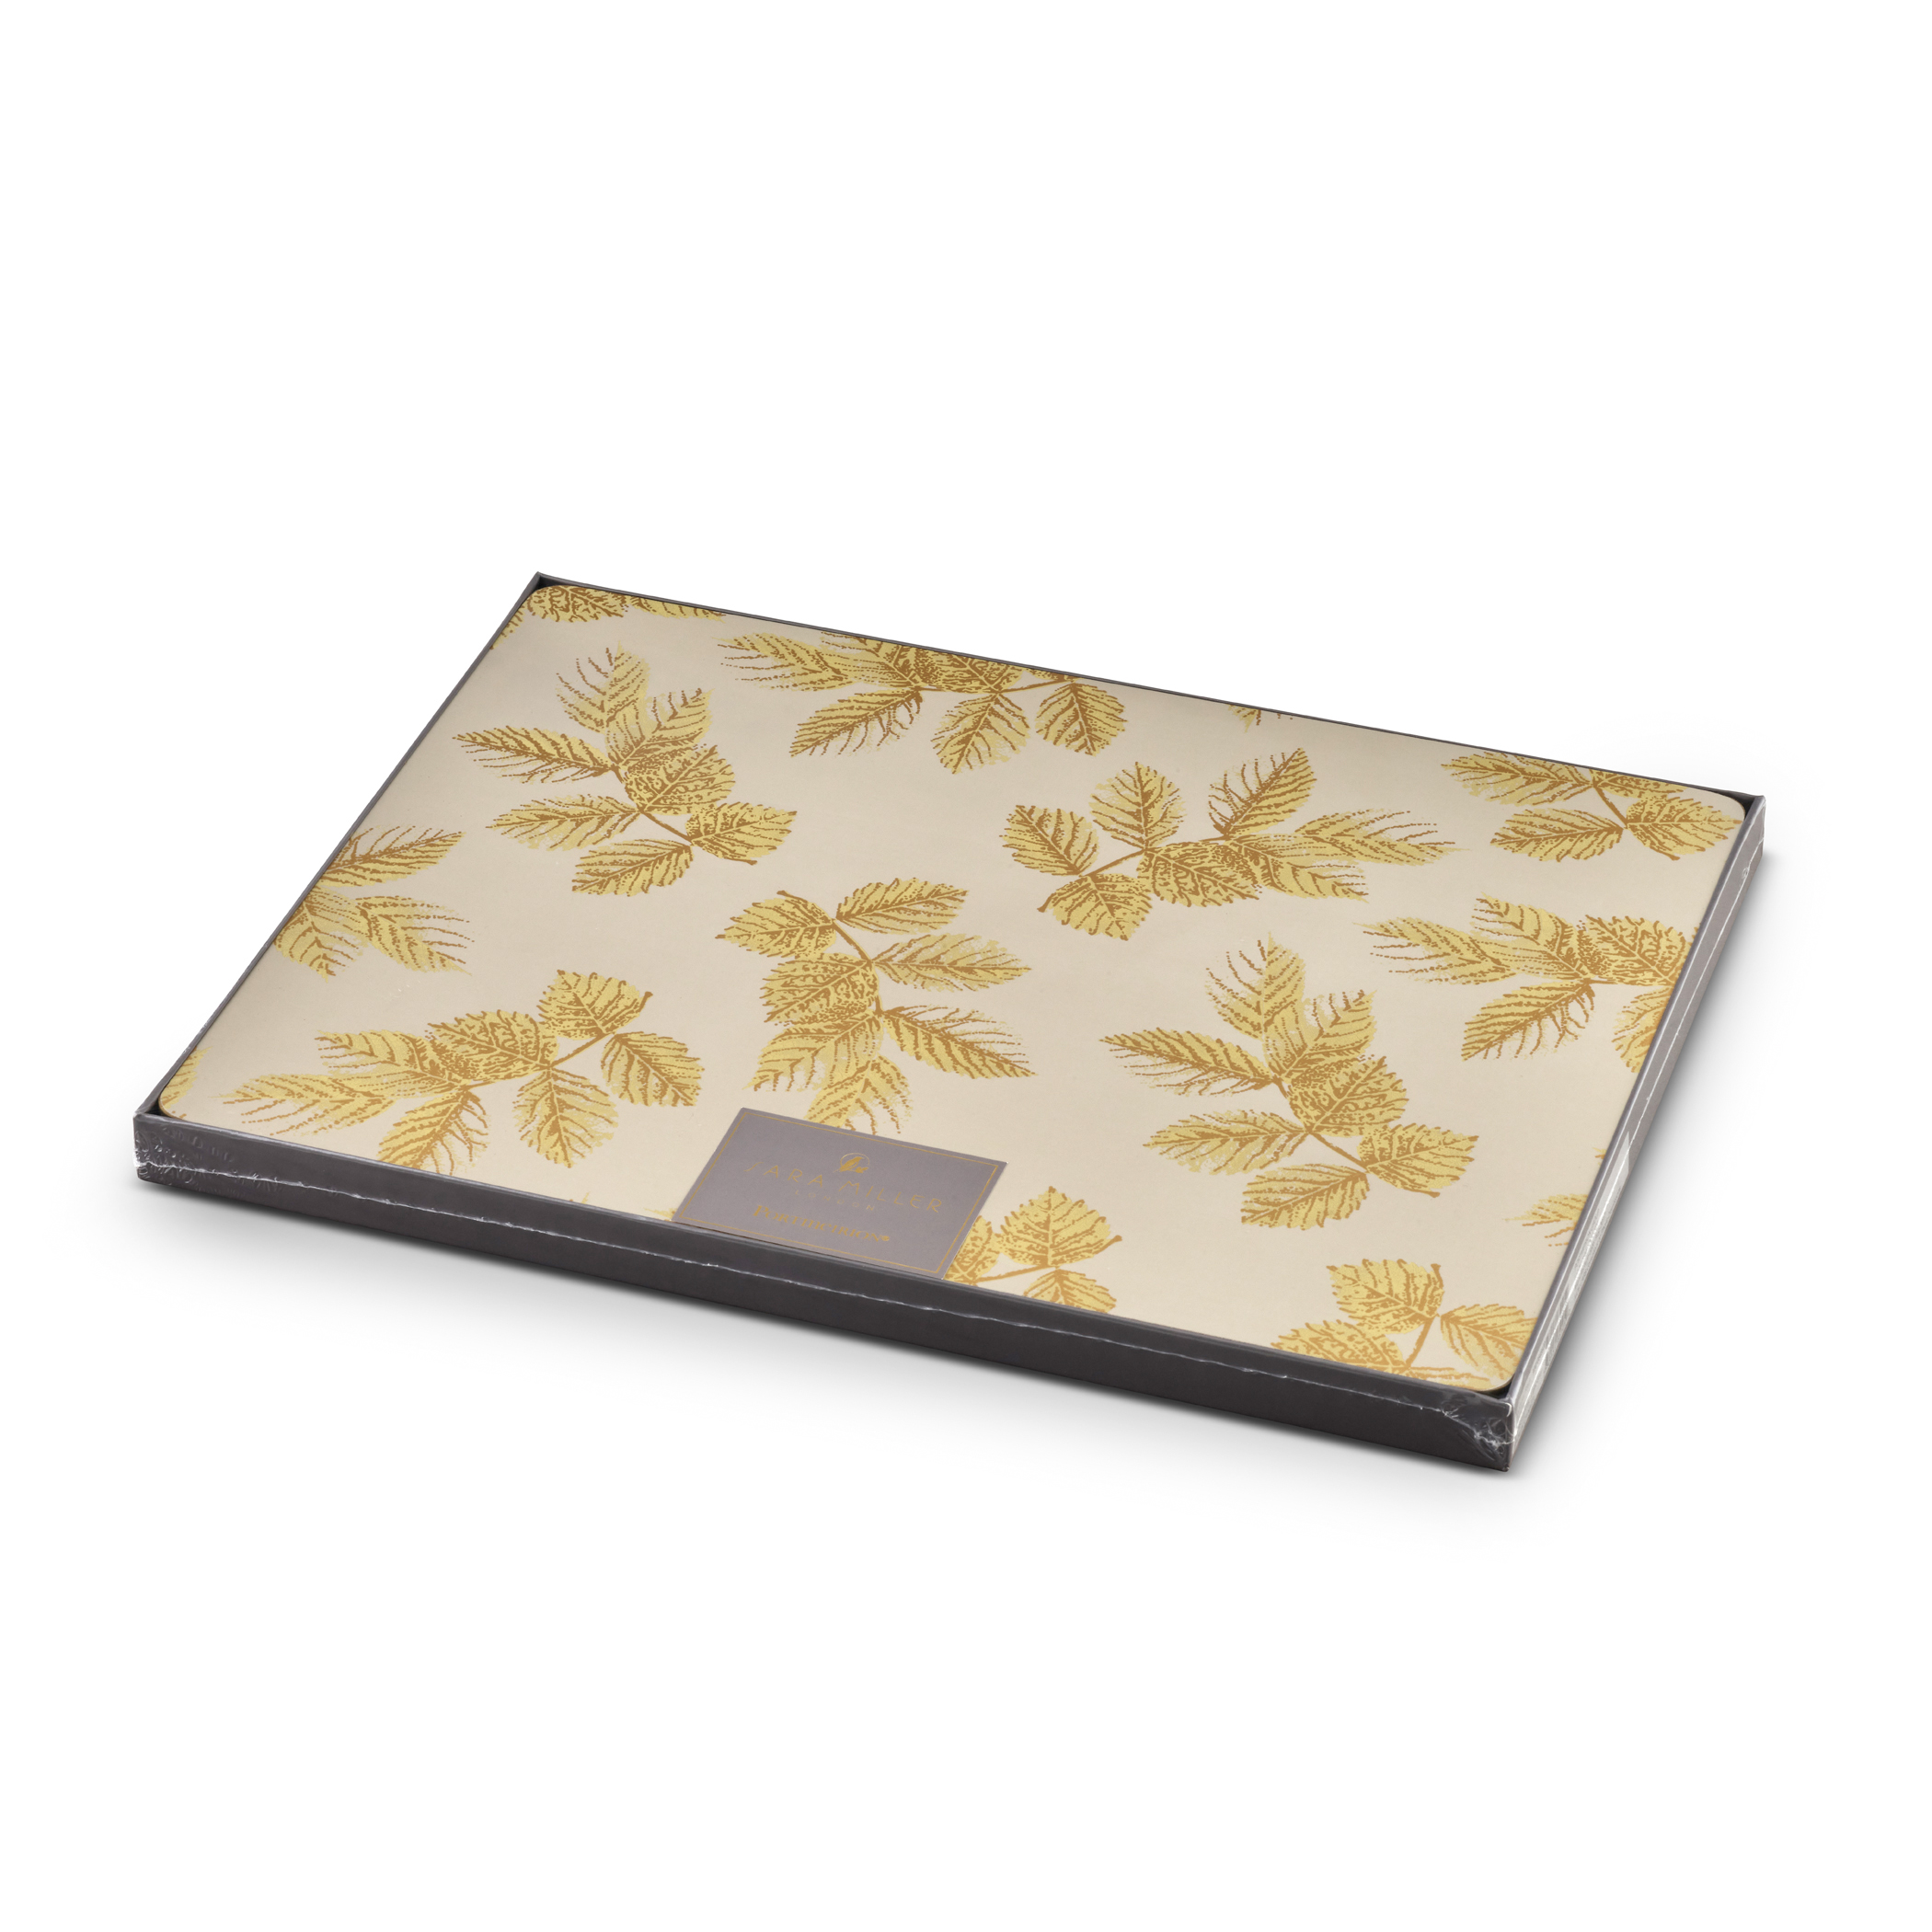 Sara Miller London Etched Leaves Placemats Set of 4 Light Grey - Large Size image number null